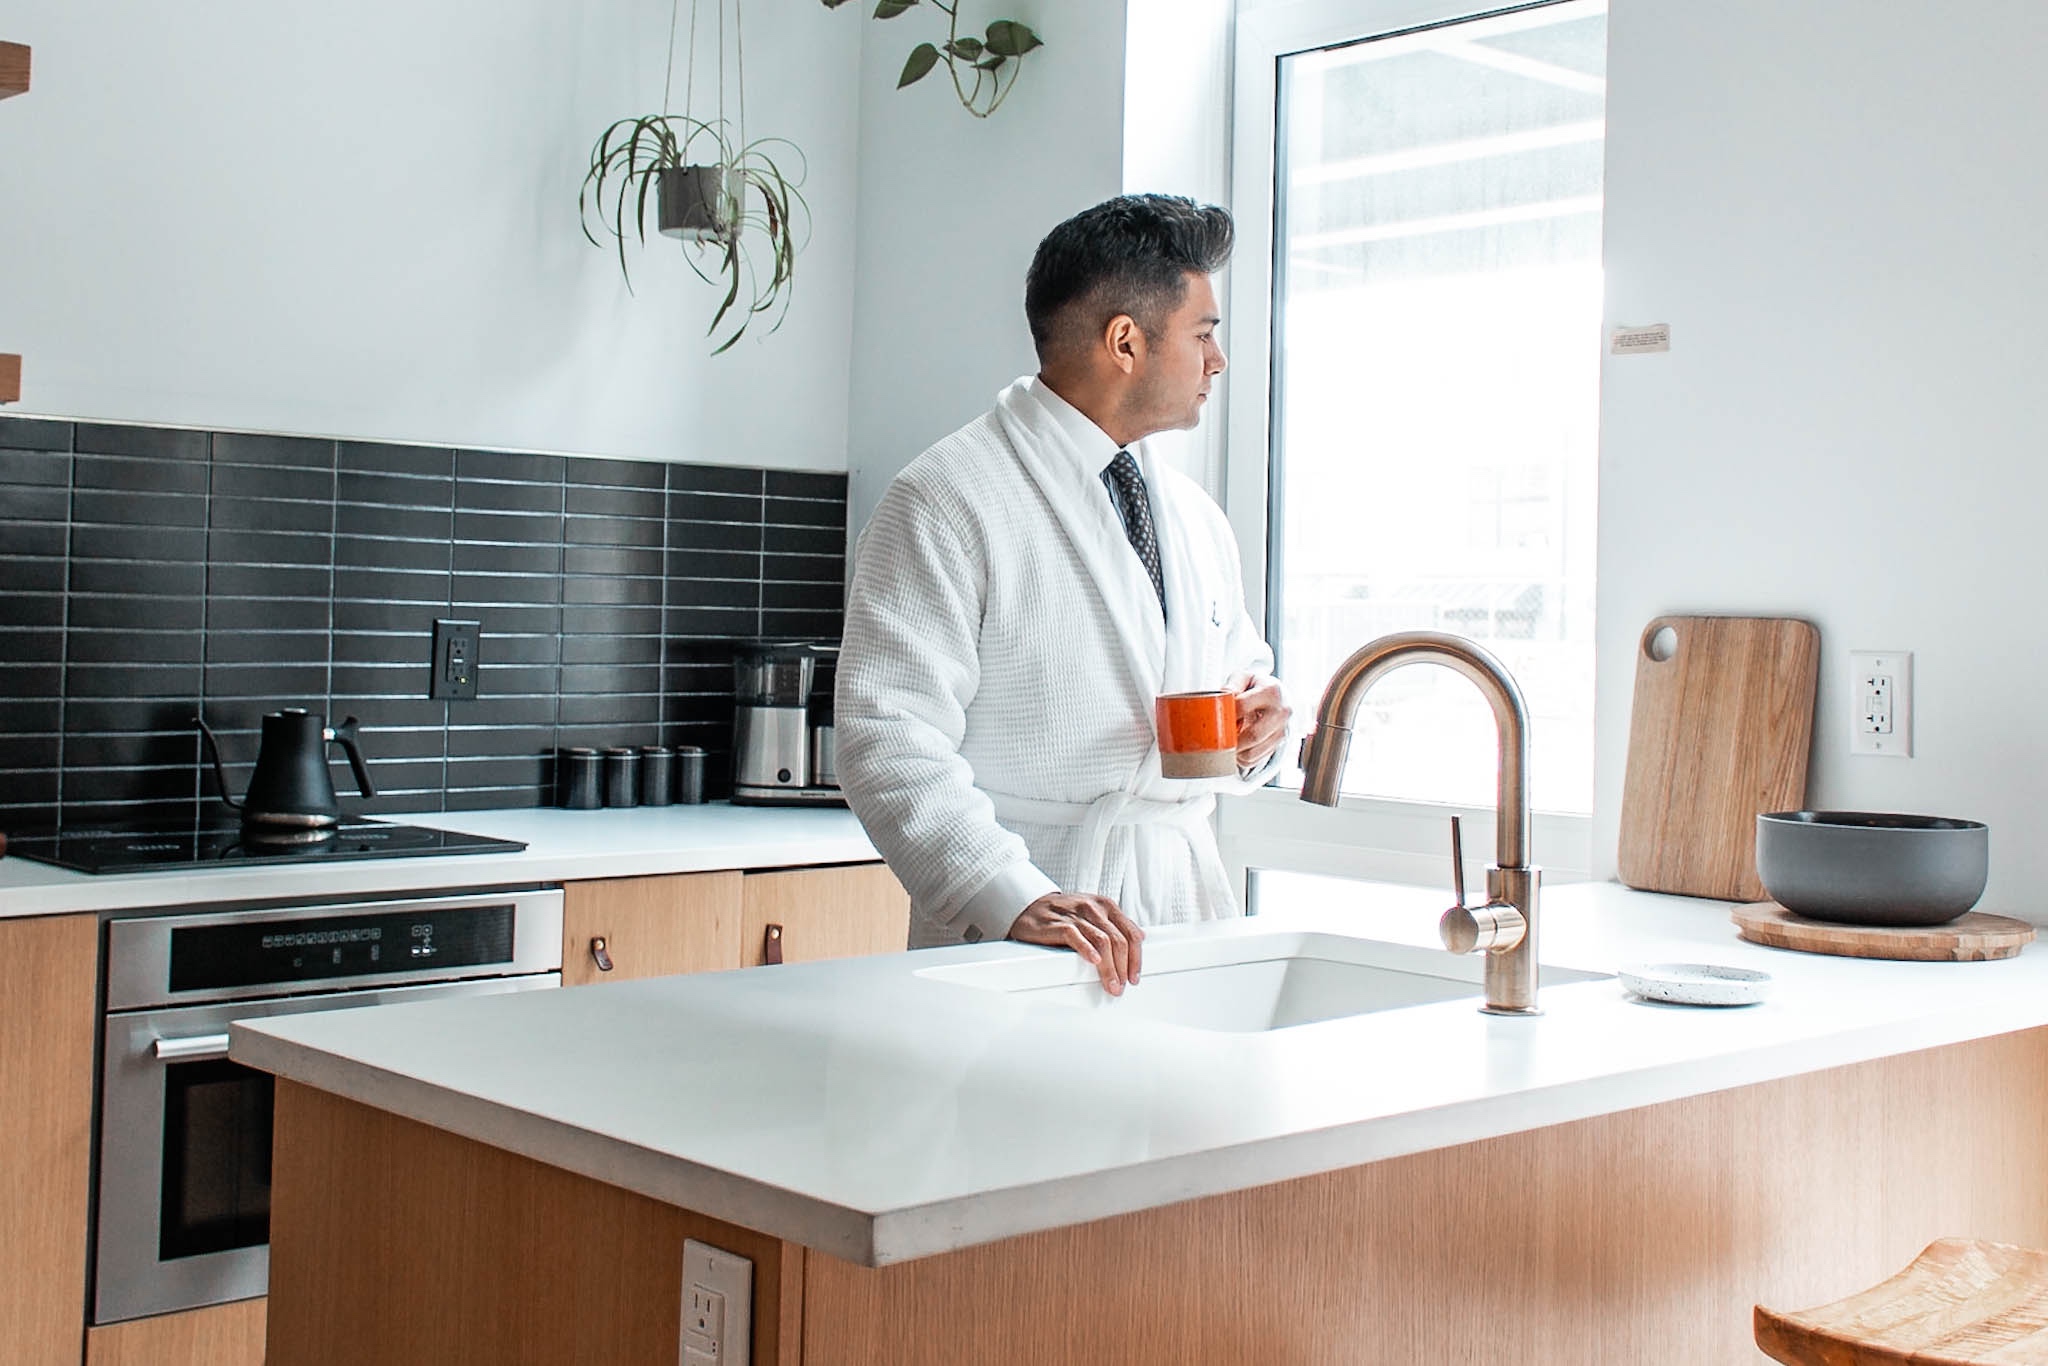 With with shirt and tie and robe handing over a sink while holding a coffee